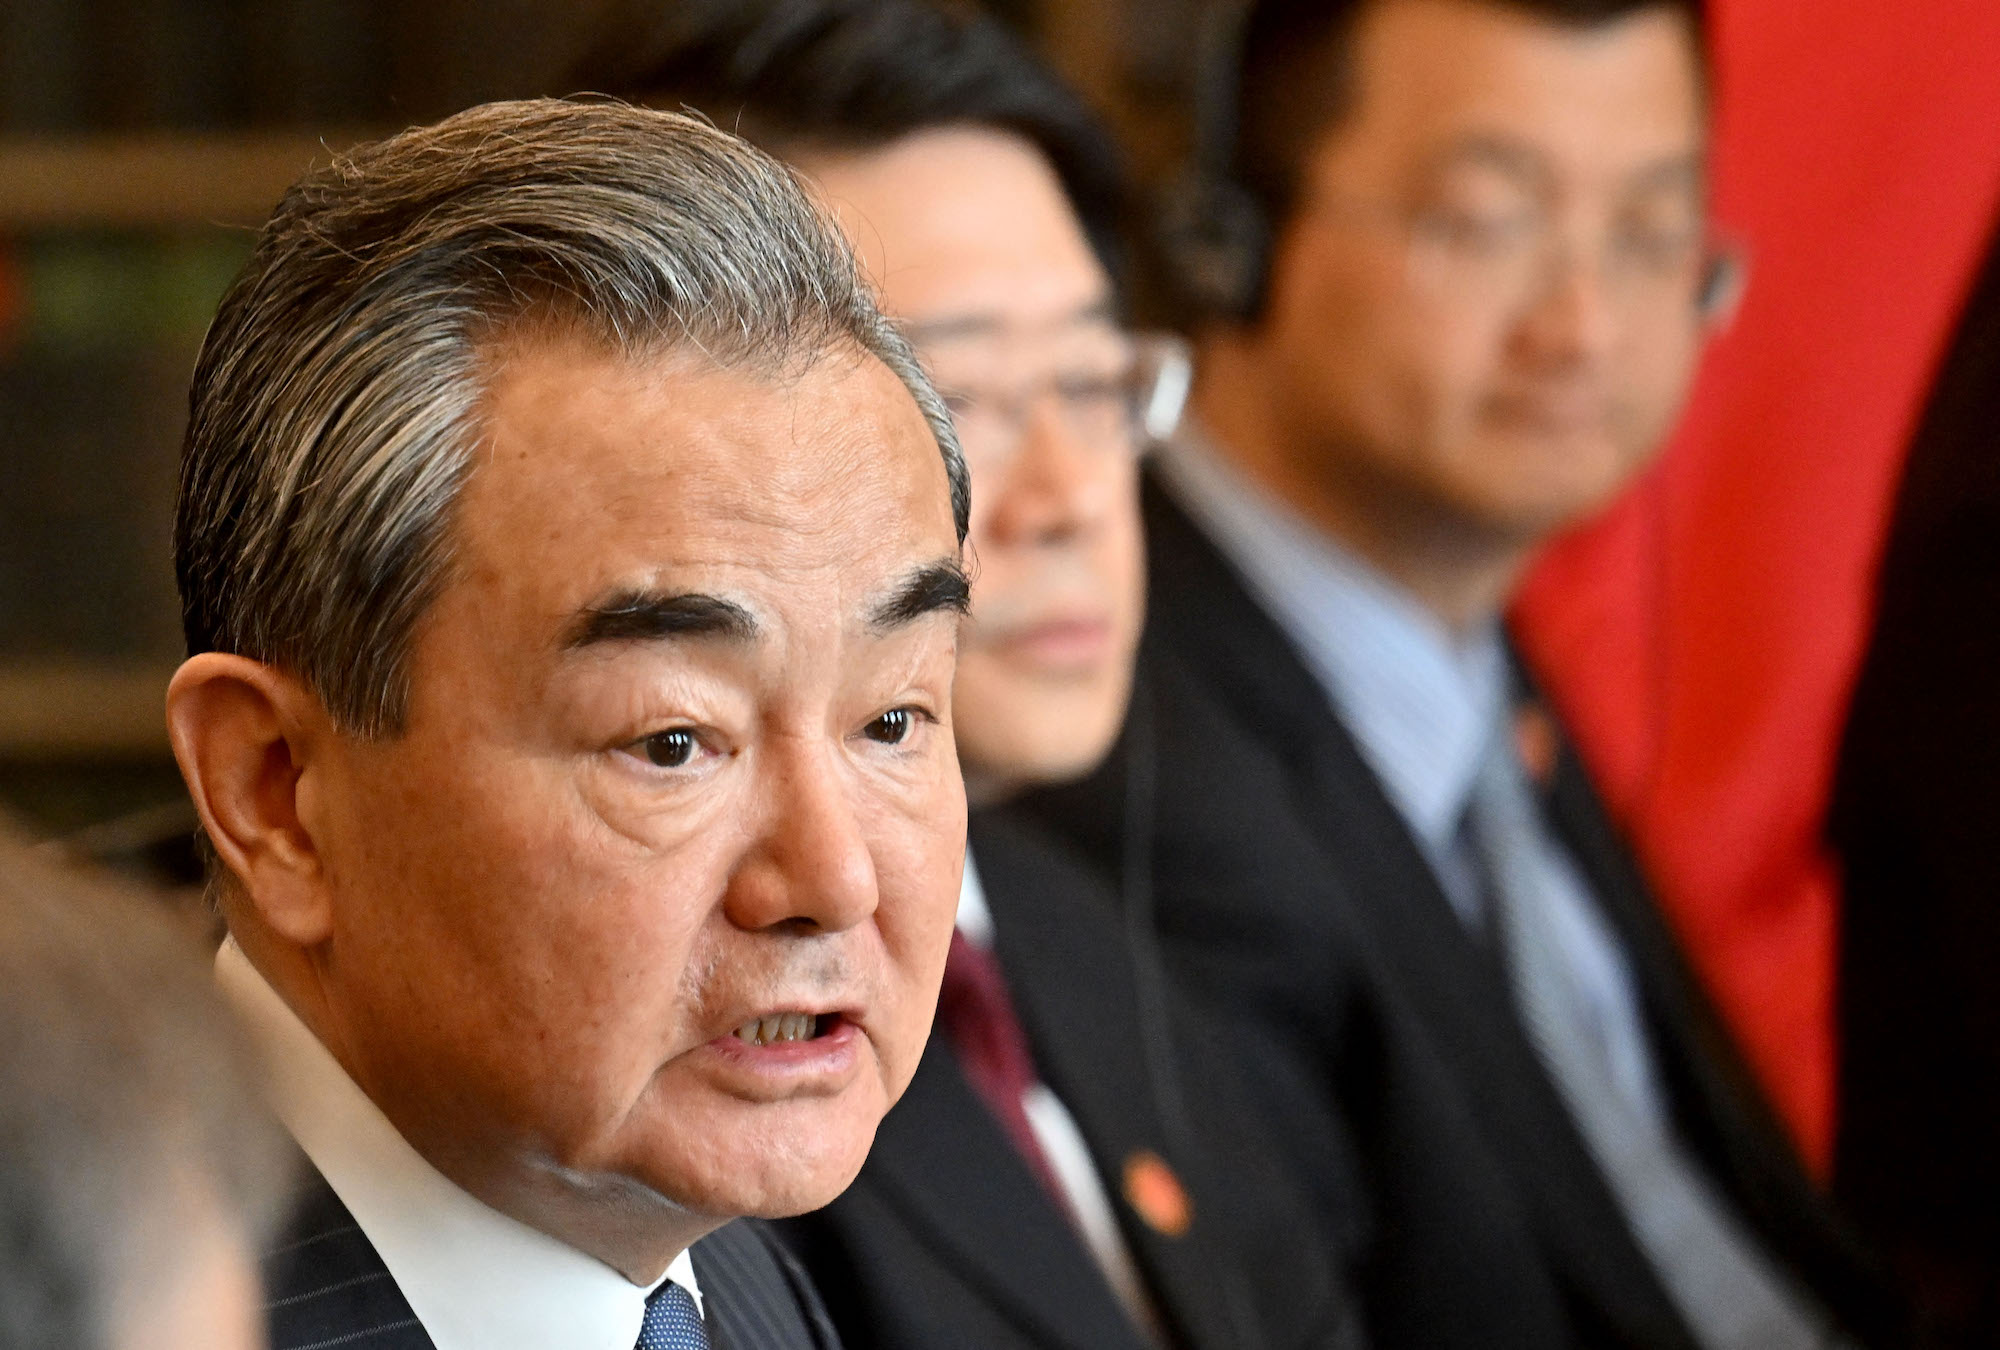 Wang Yi speaks during a meeting with the Hungarian Foreign and Trade Minister in Budapest on Monday.